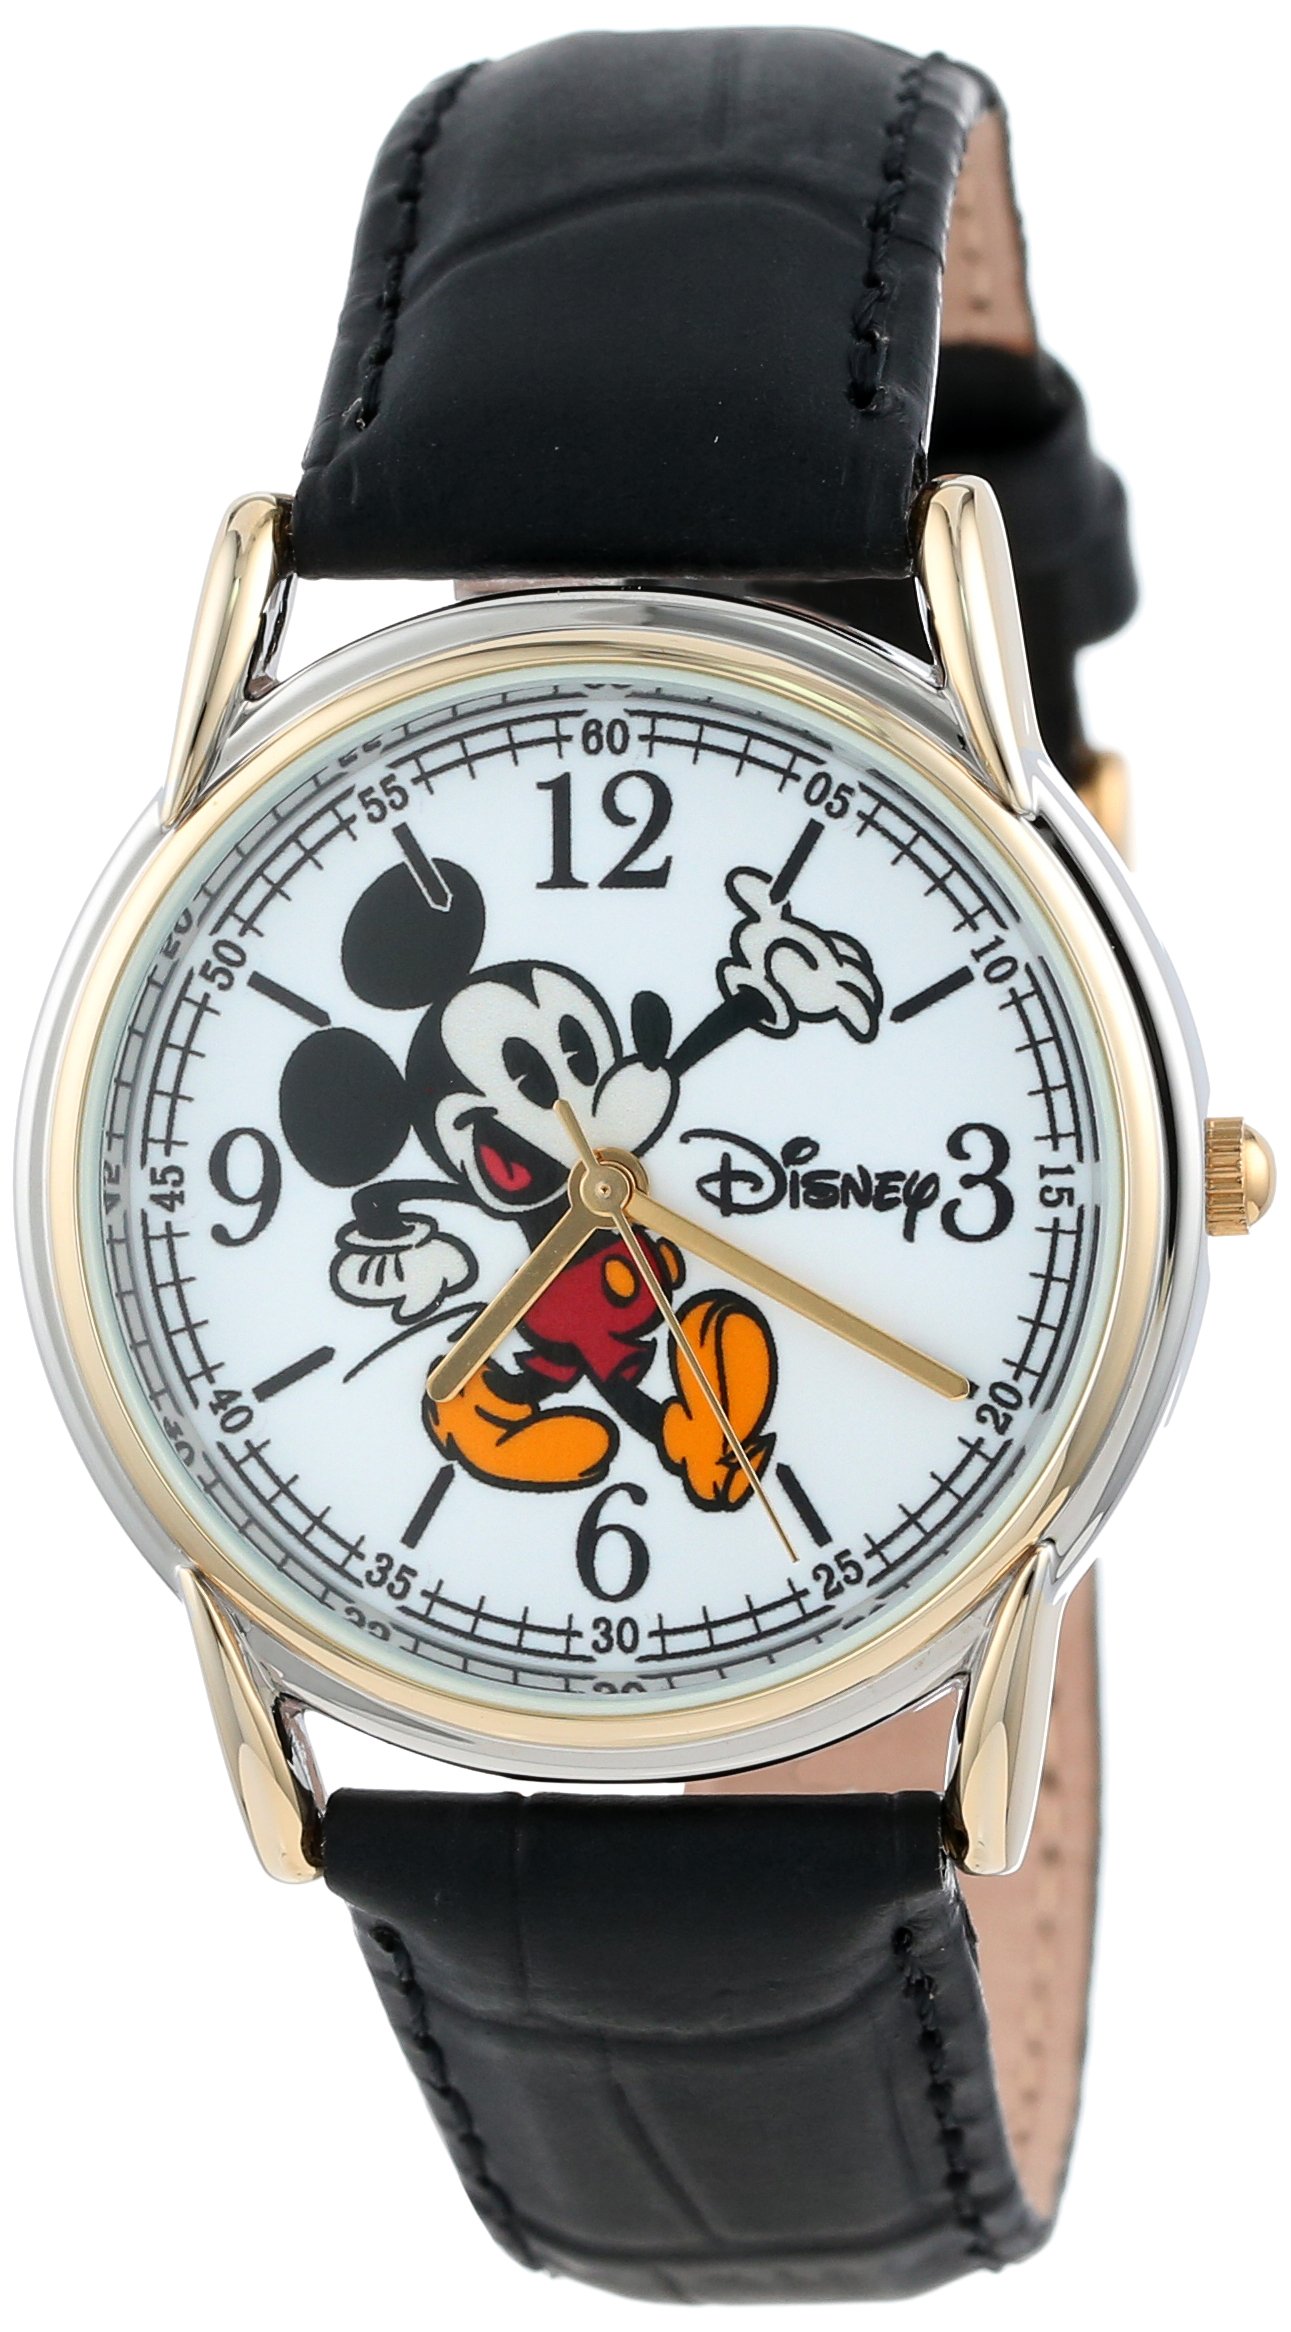 Disney Mickey Mouse Adult Classic Cardiff Analog Quartz Leather Strap Watch